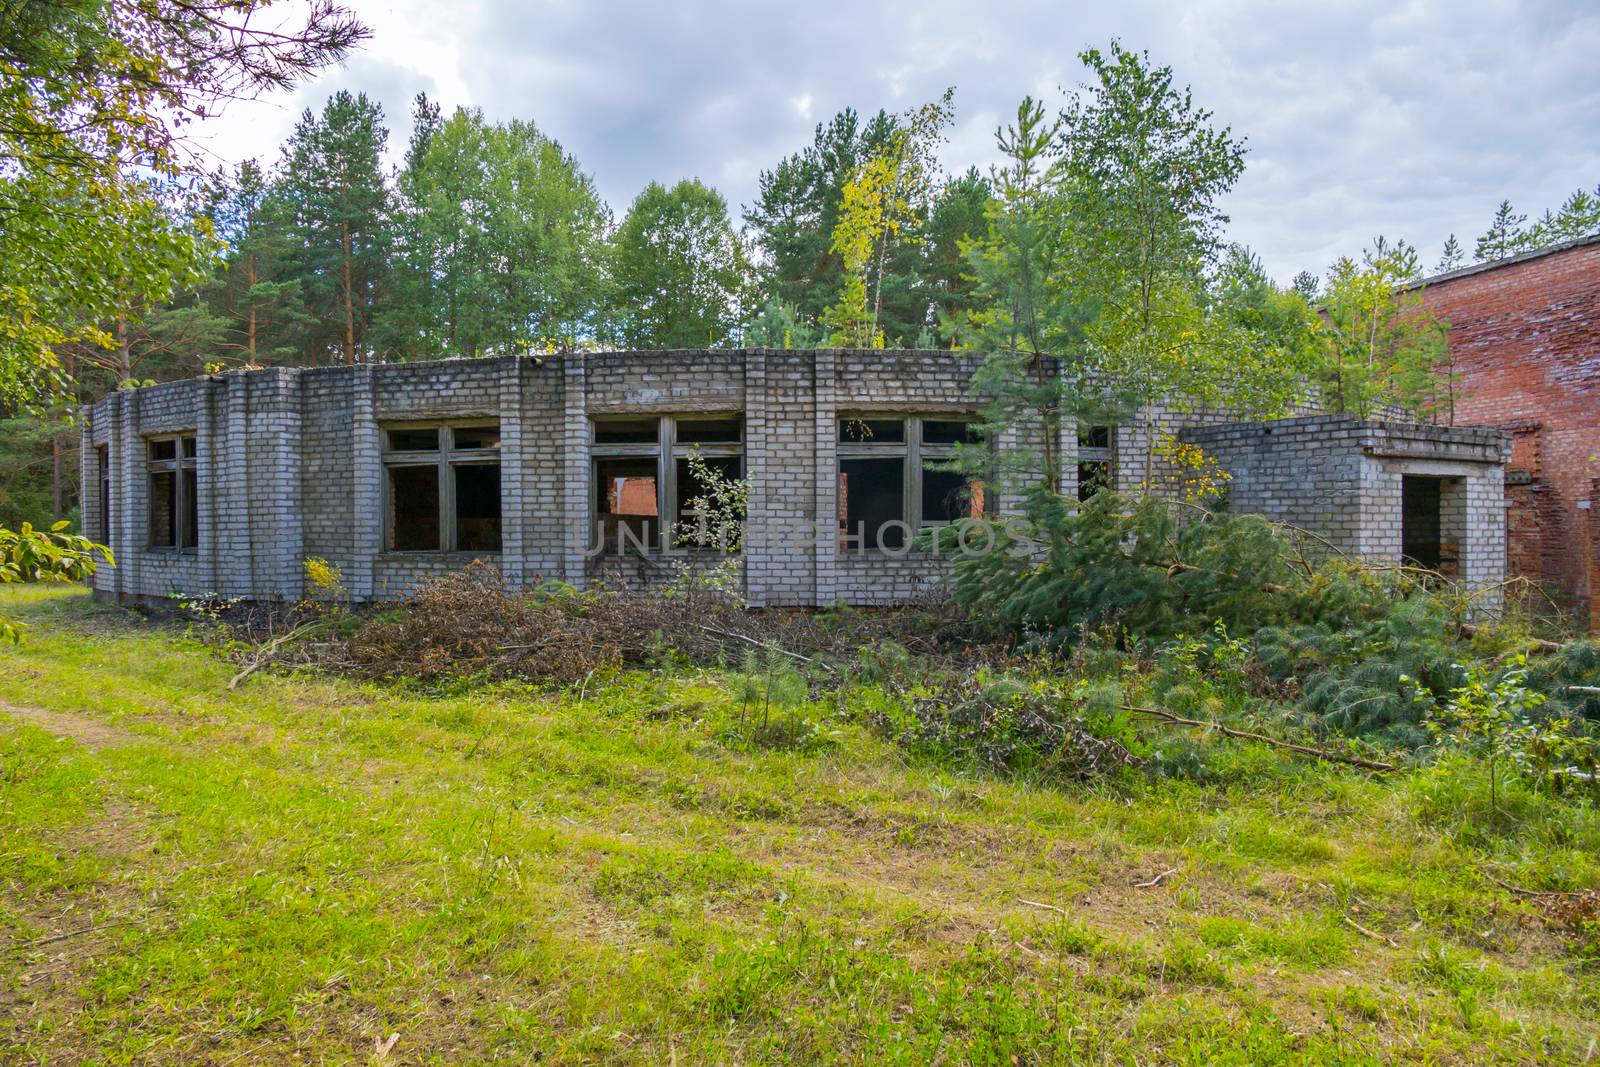 a small abandoned building in the middle of a forest glade surrounded by dense forest by Adamchuk